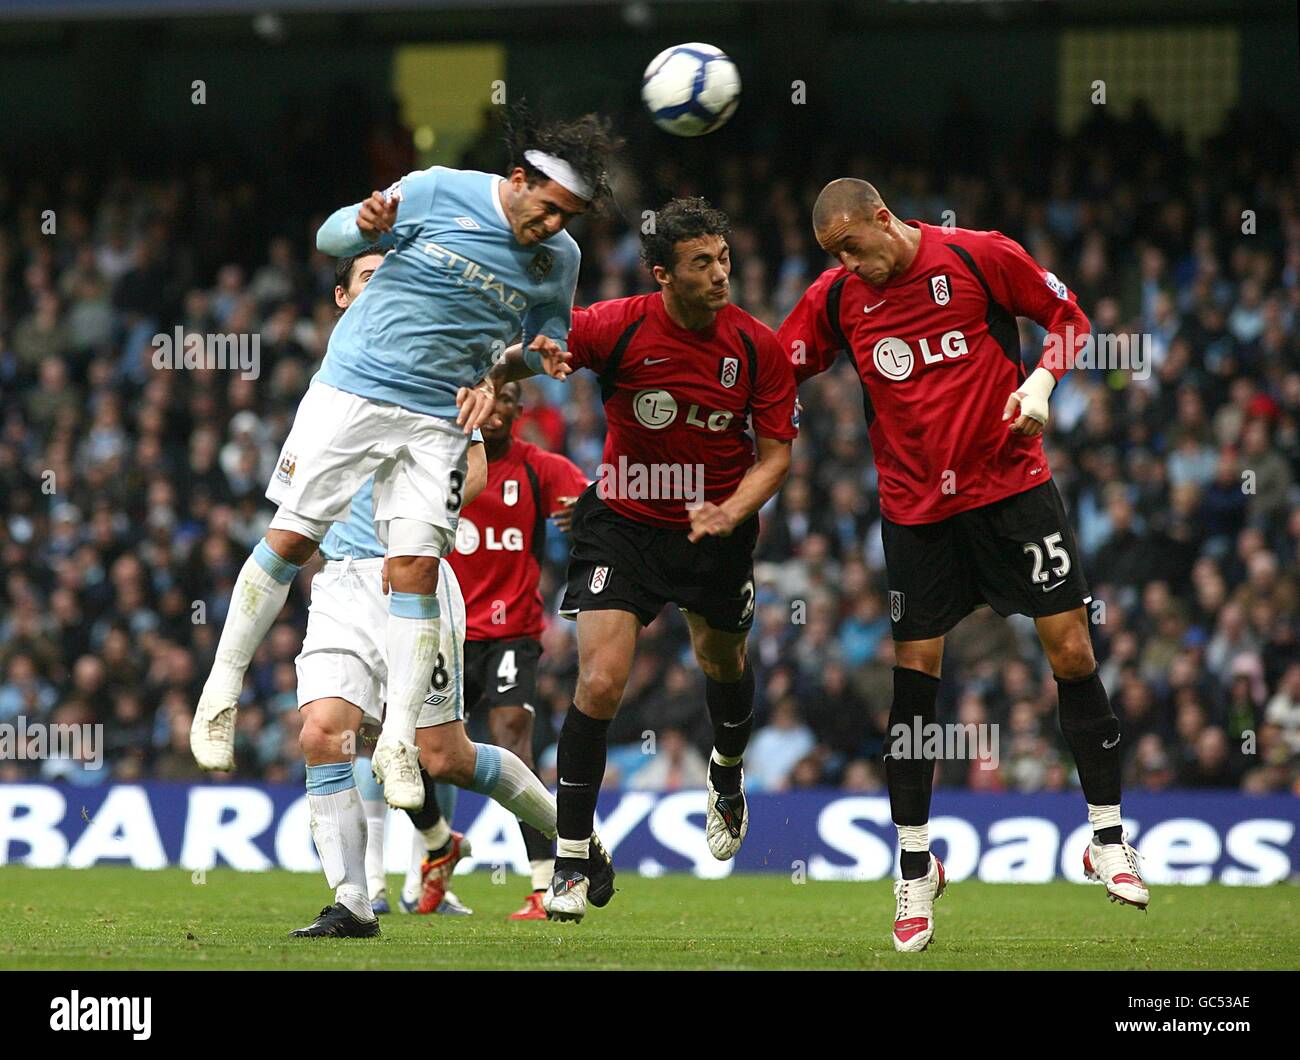 Soccer - Barclays Premier League - Manchester City v Fulham - City of Manchester Stadium. Manchester City's Carlos Tevez (left) directs a header on goal, under pressure from Fulham's Stephen Kelly (centre) and Bobby Zamora Stock Photo